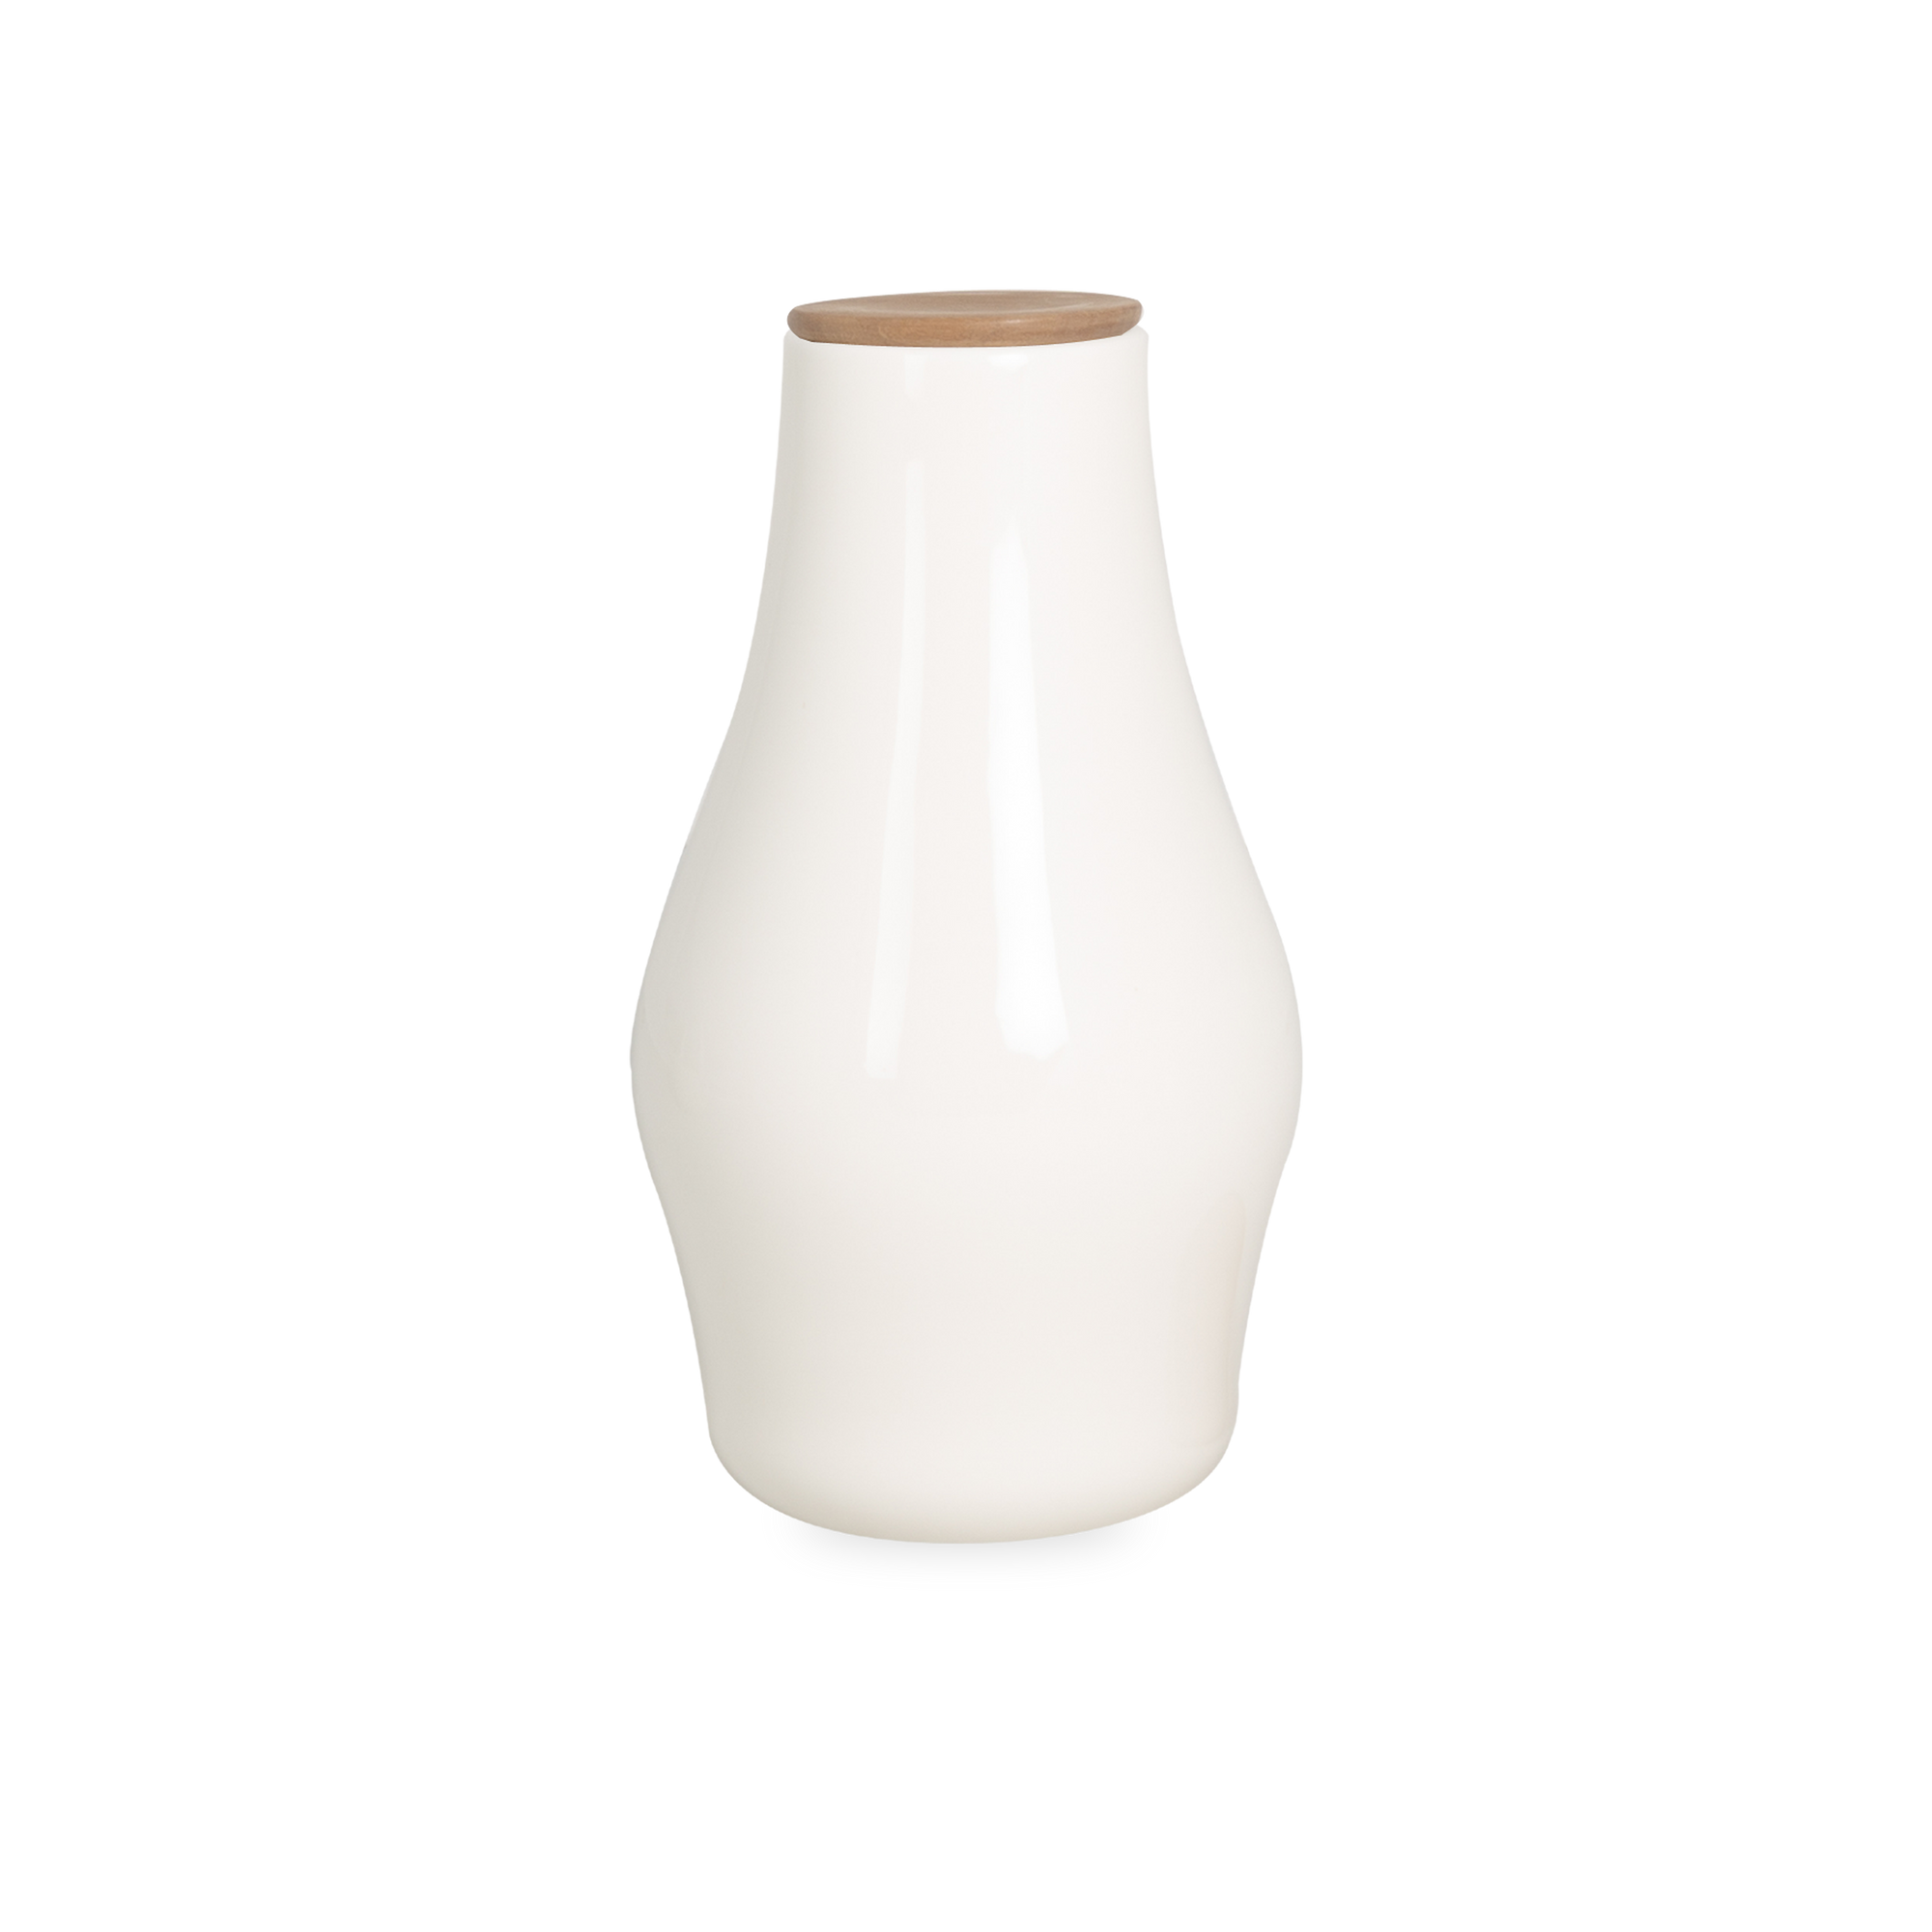 With its sculptural shape and handcrafted wooden lid, the carafe is perfect to serve water or wine, or use as a vase full of blooms.